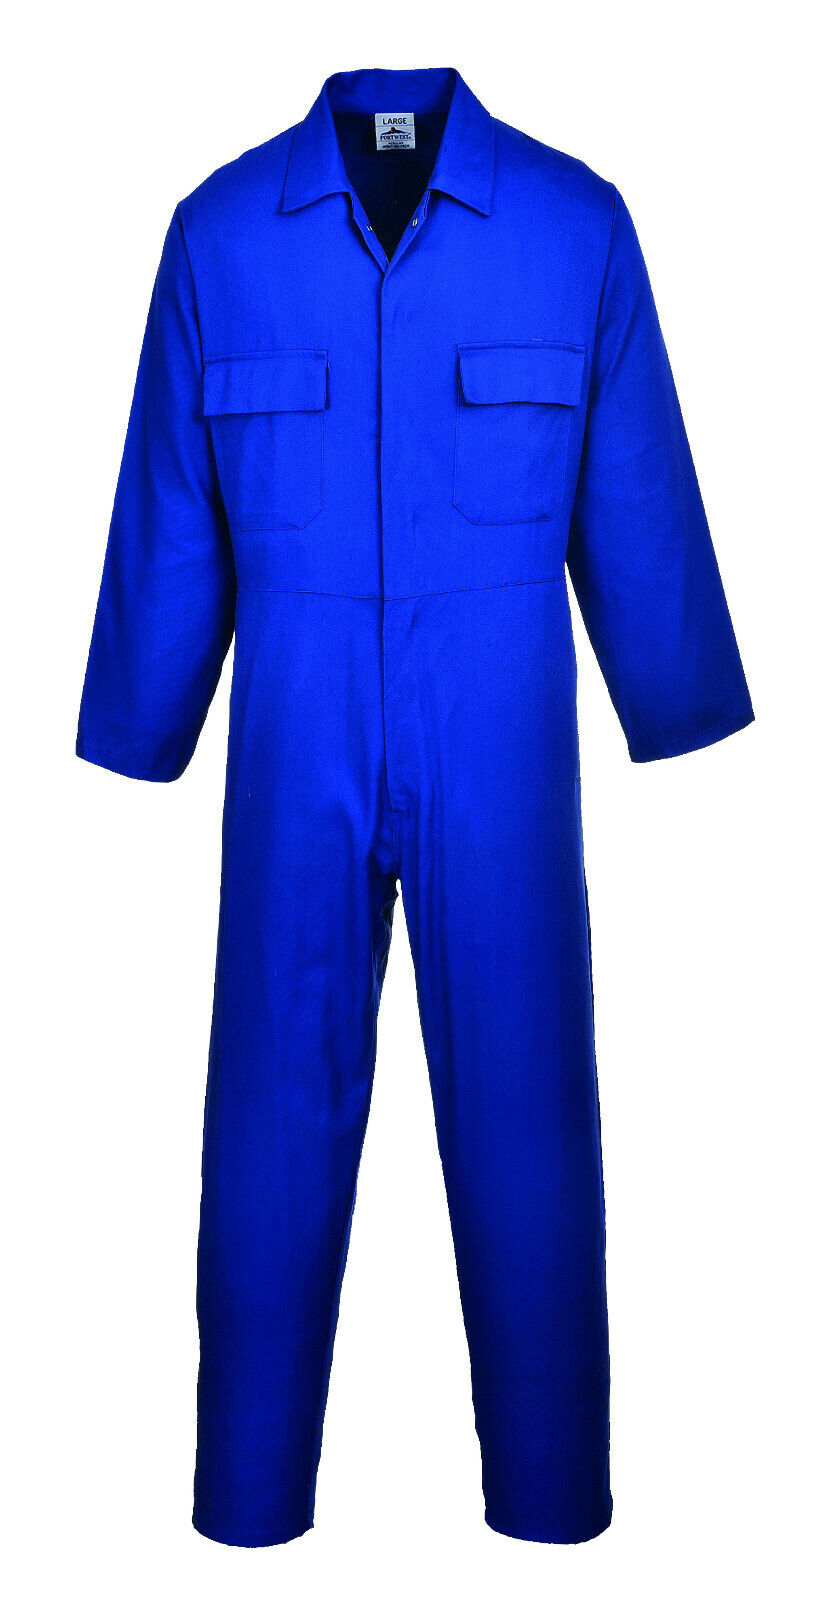 Portwest S999 Euro Work Polycotton Coverall Mechanic Jumpsuit Safety Overalls PORTWEST S999 - фотография #7